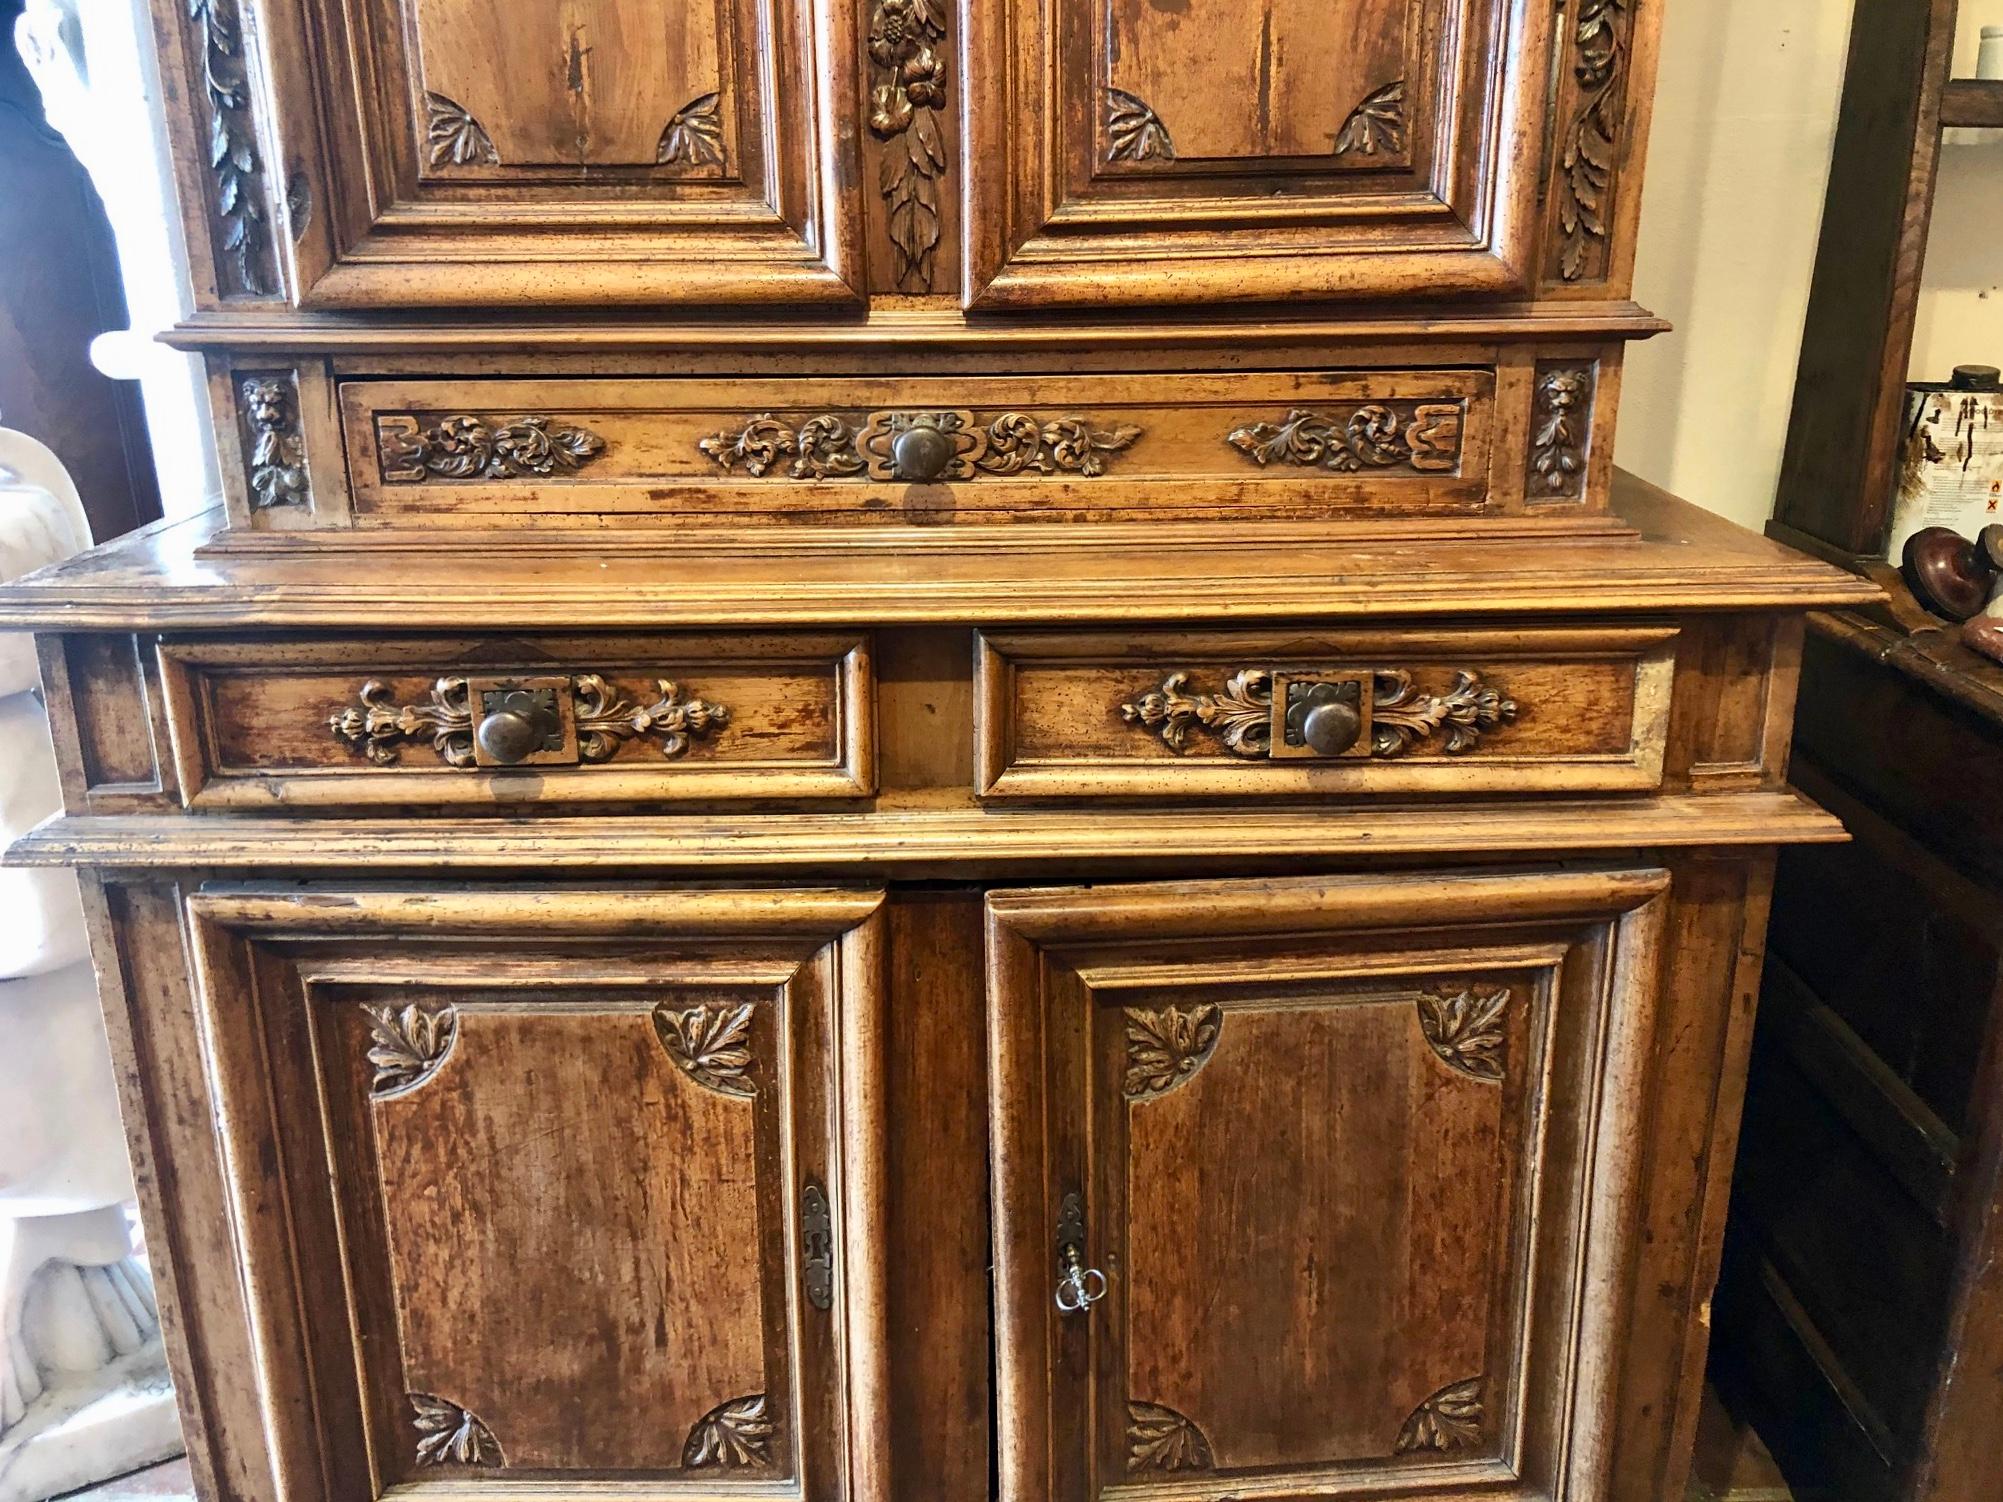 This is a rare period walnut French buffet Deux corps from the Provence region of France. It has a deep, rich patina along with deep carvings and motifs with worn reliefs, showing its 300 year old age. Superb carvings to the top and door